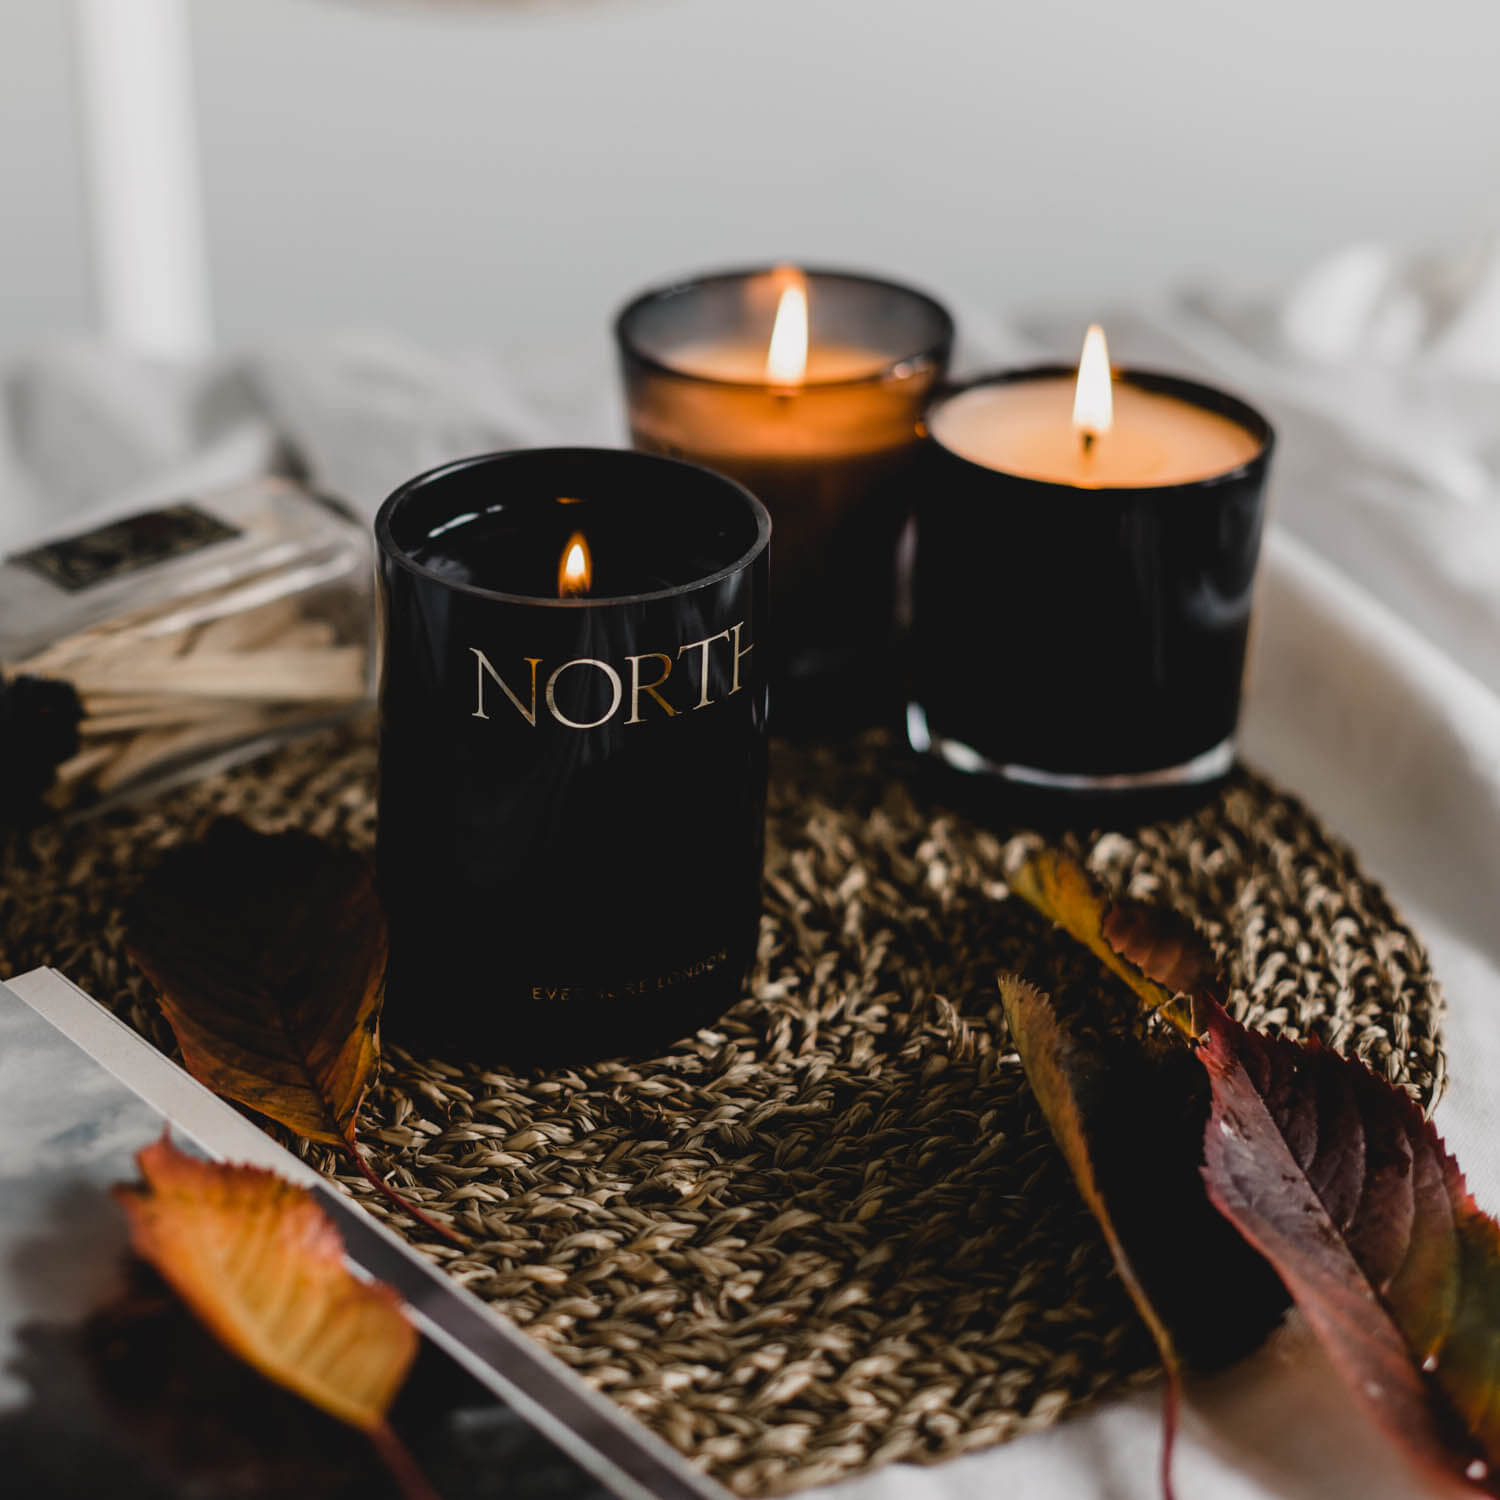 North Scented Candle by Evermore